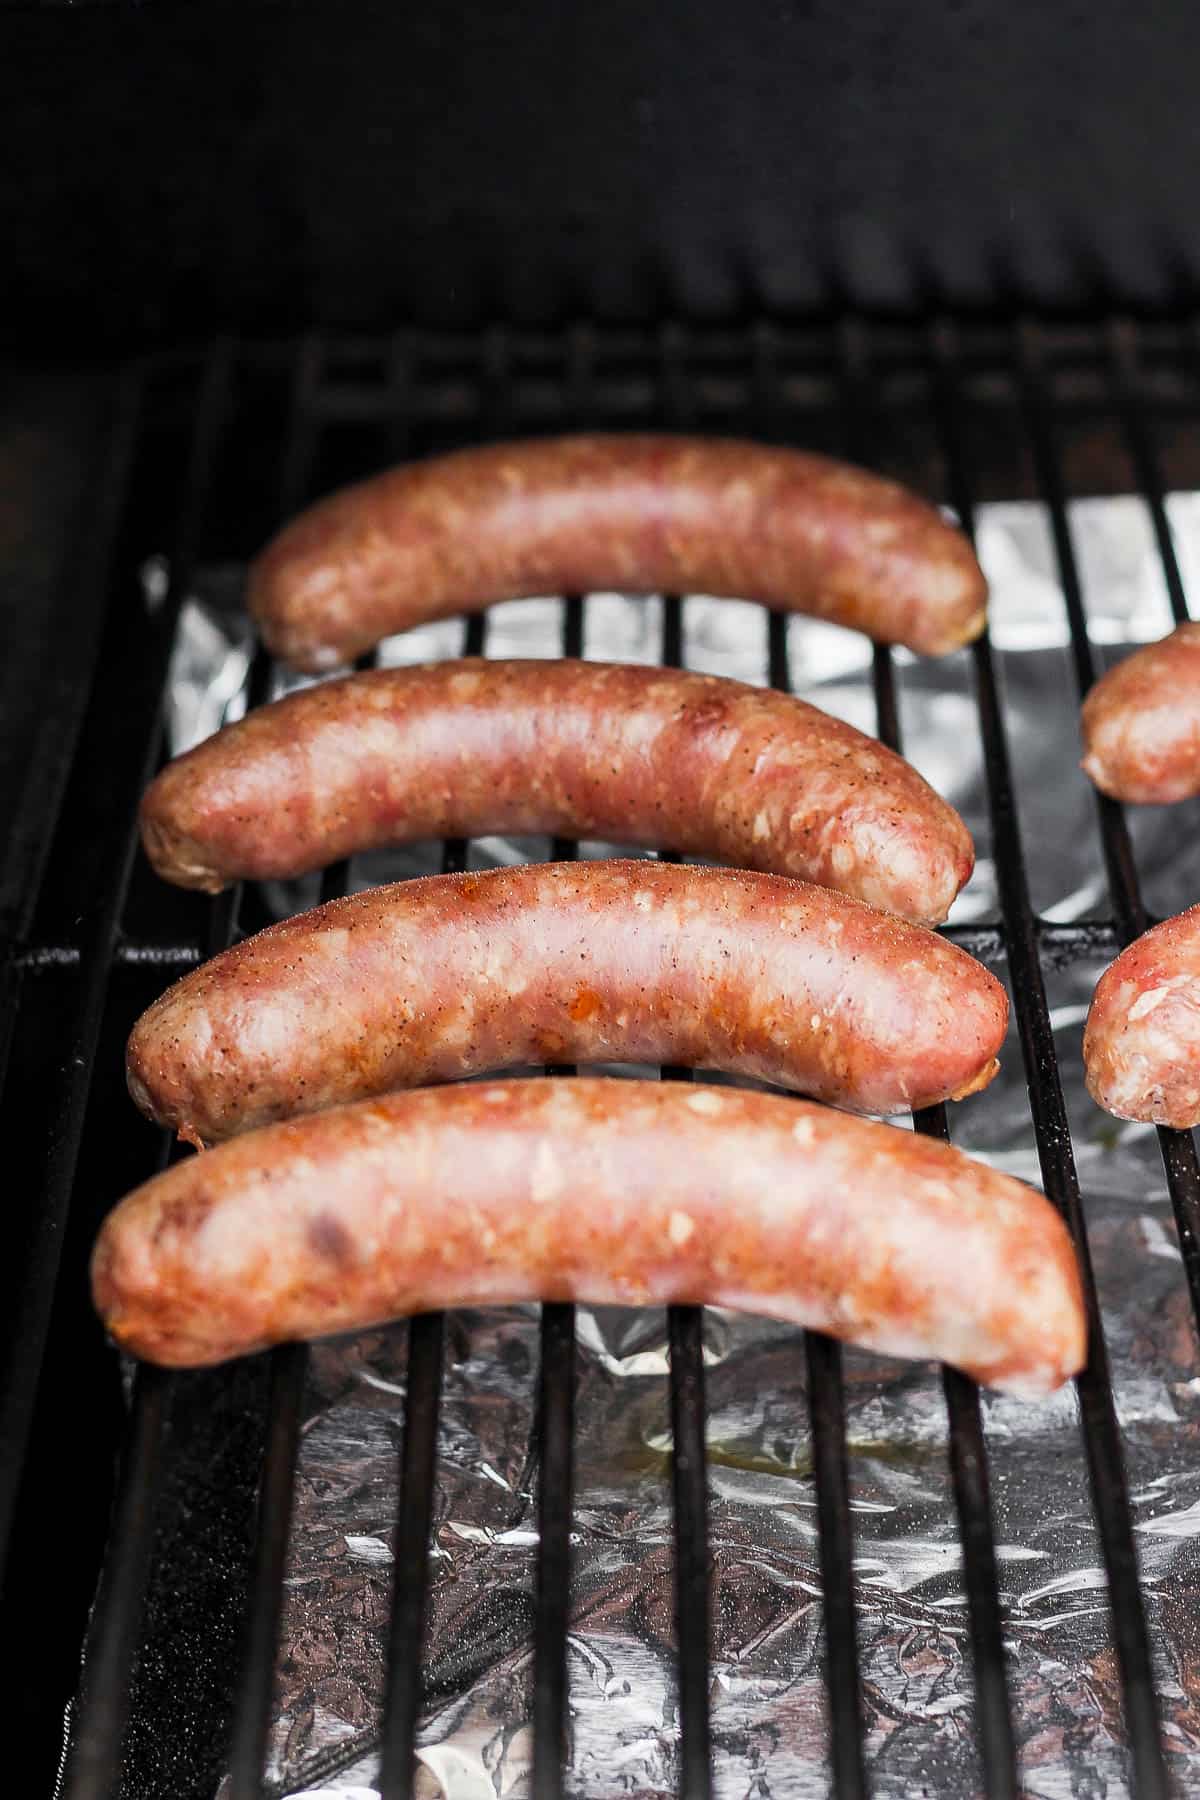 Brats on a smoker, fully cooked.